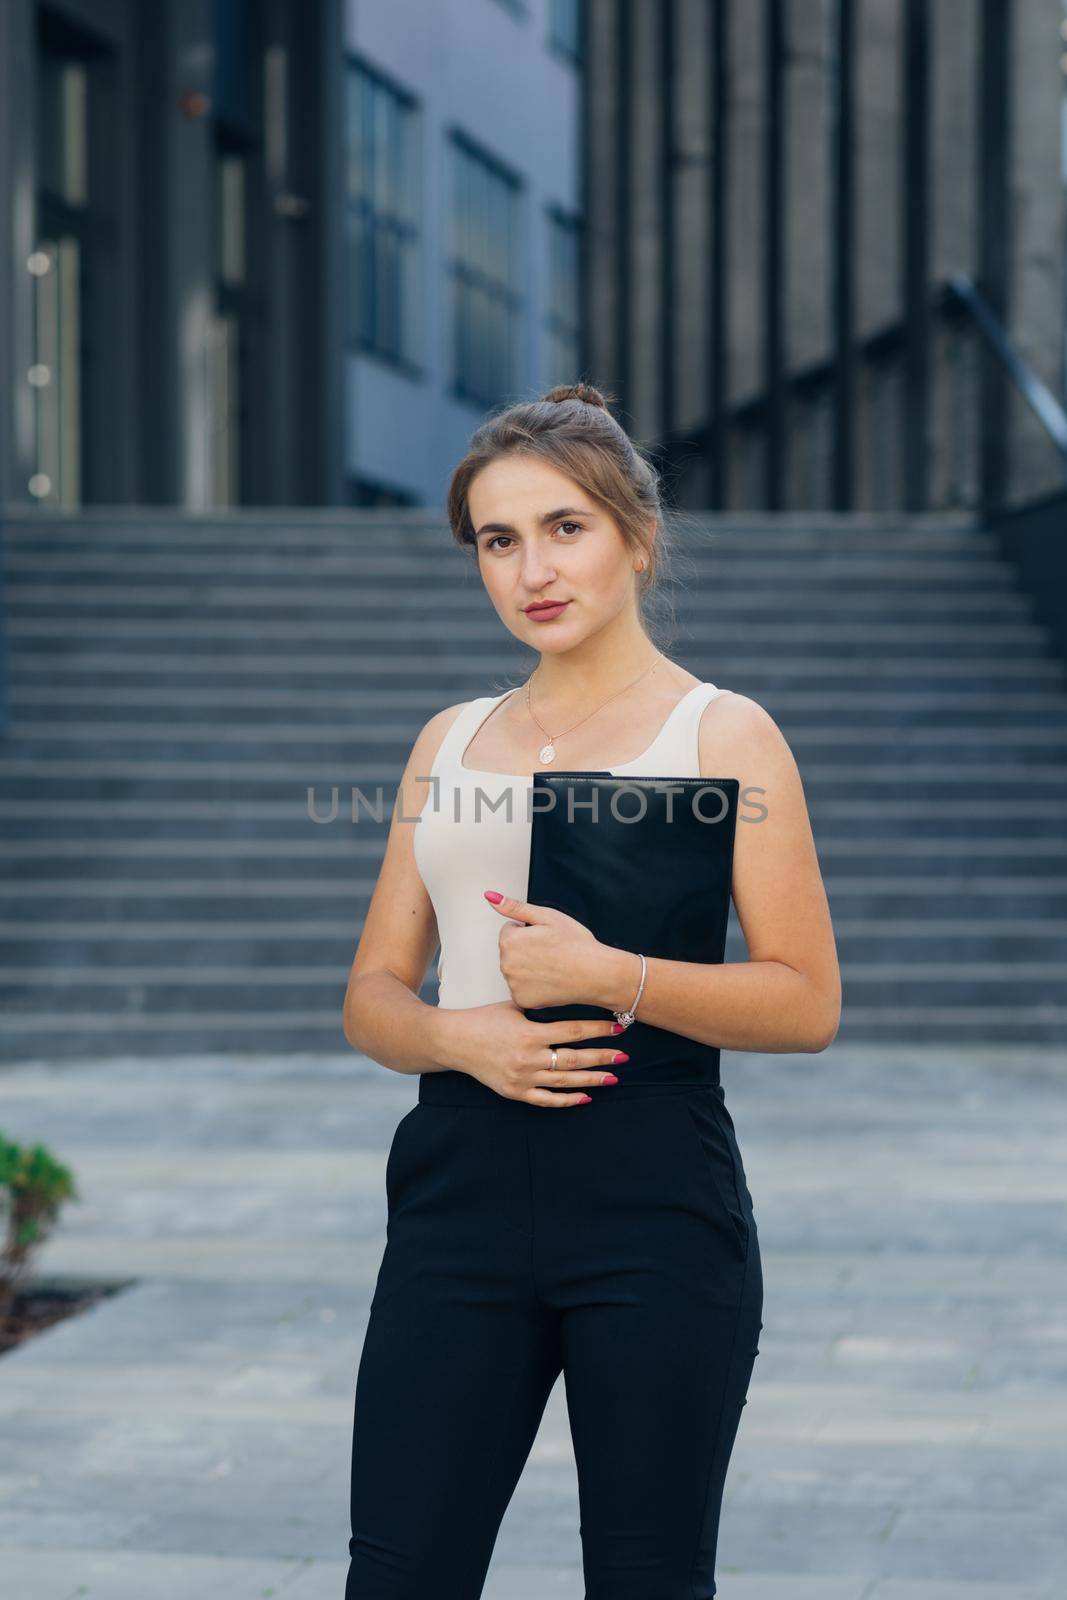 Successful businesswoman standing outdoors near office building. Portrait of a young businesswoman